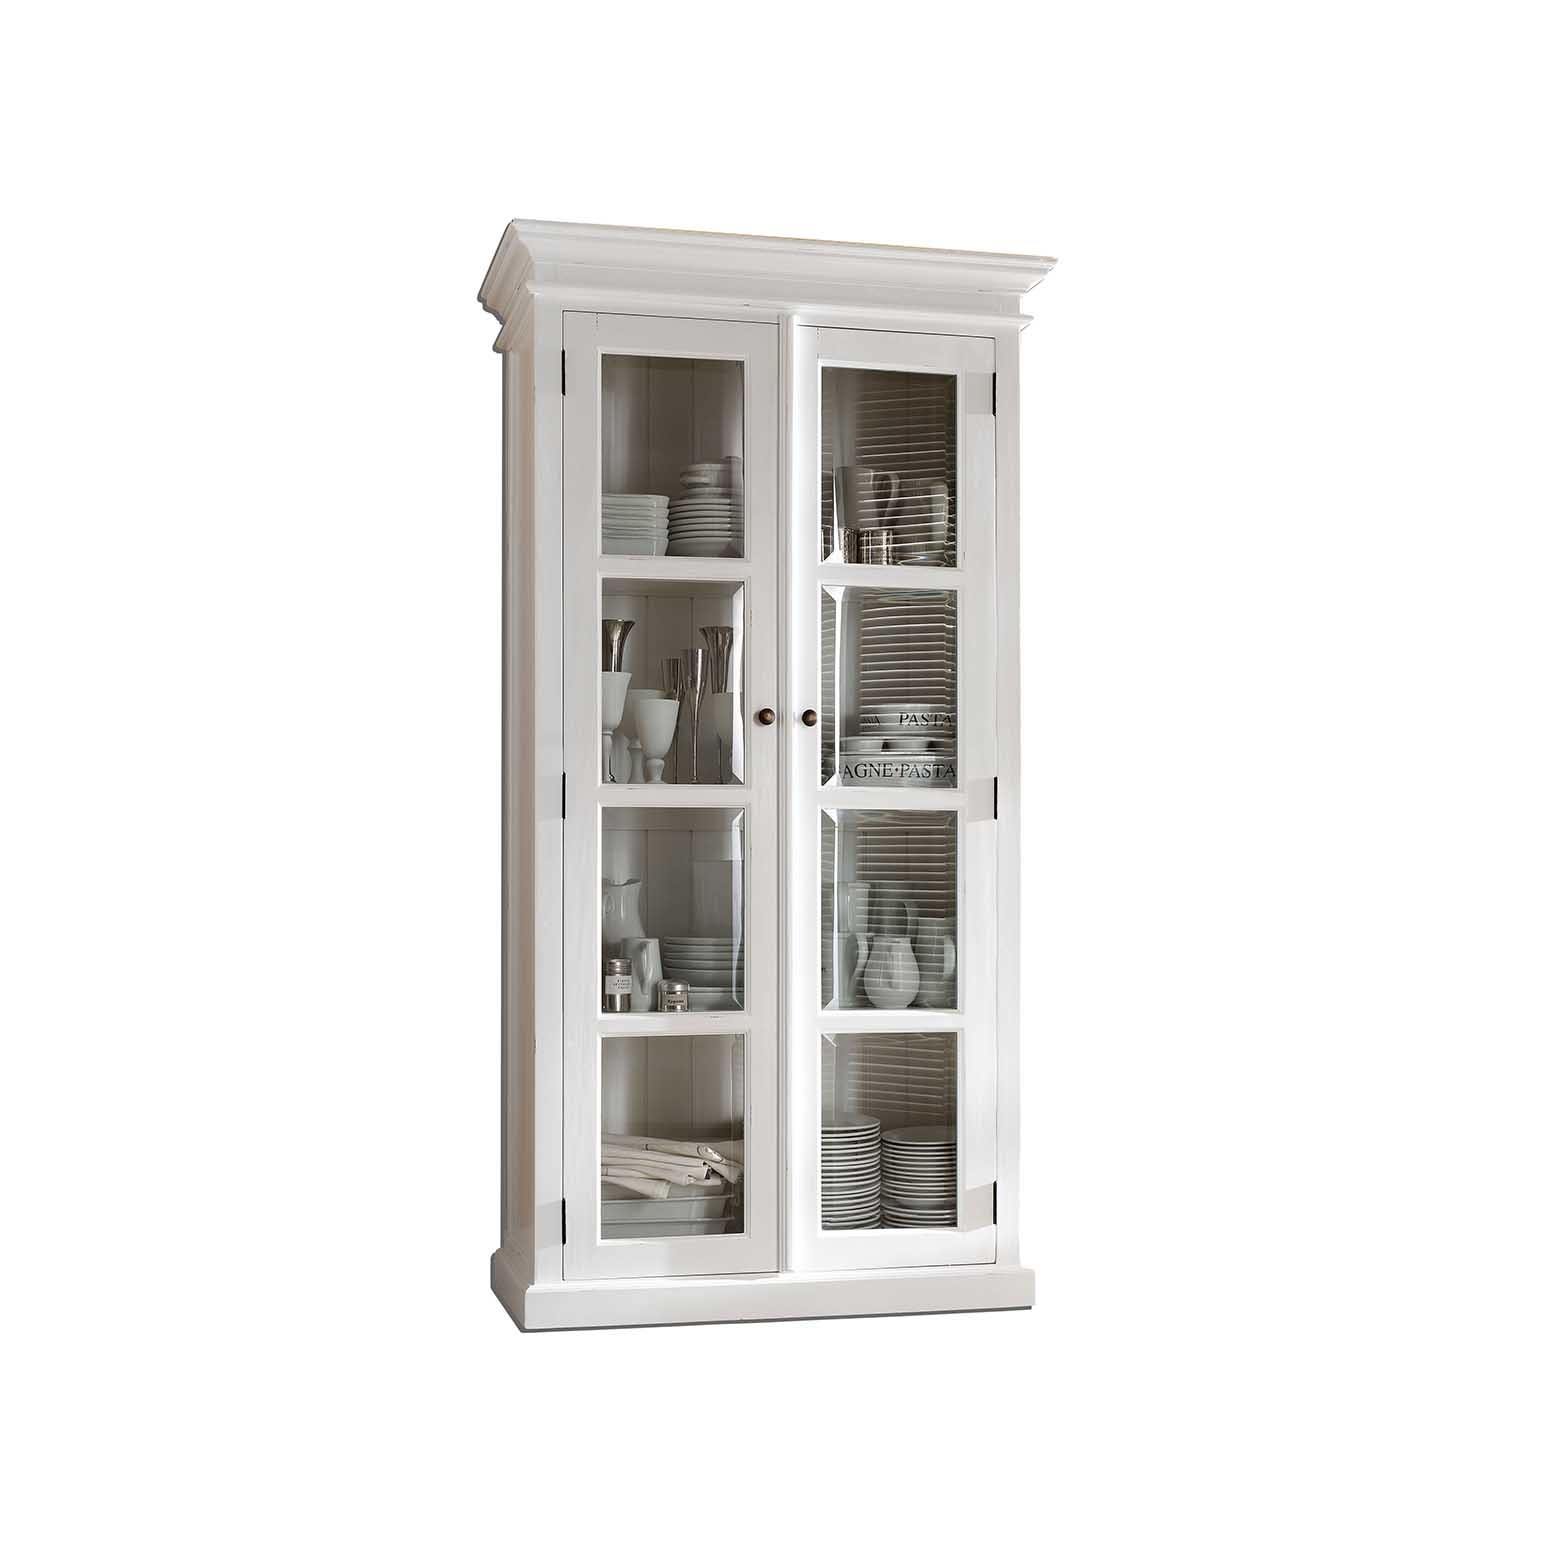 Choose your french provincial style kitchen cabinet!